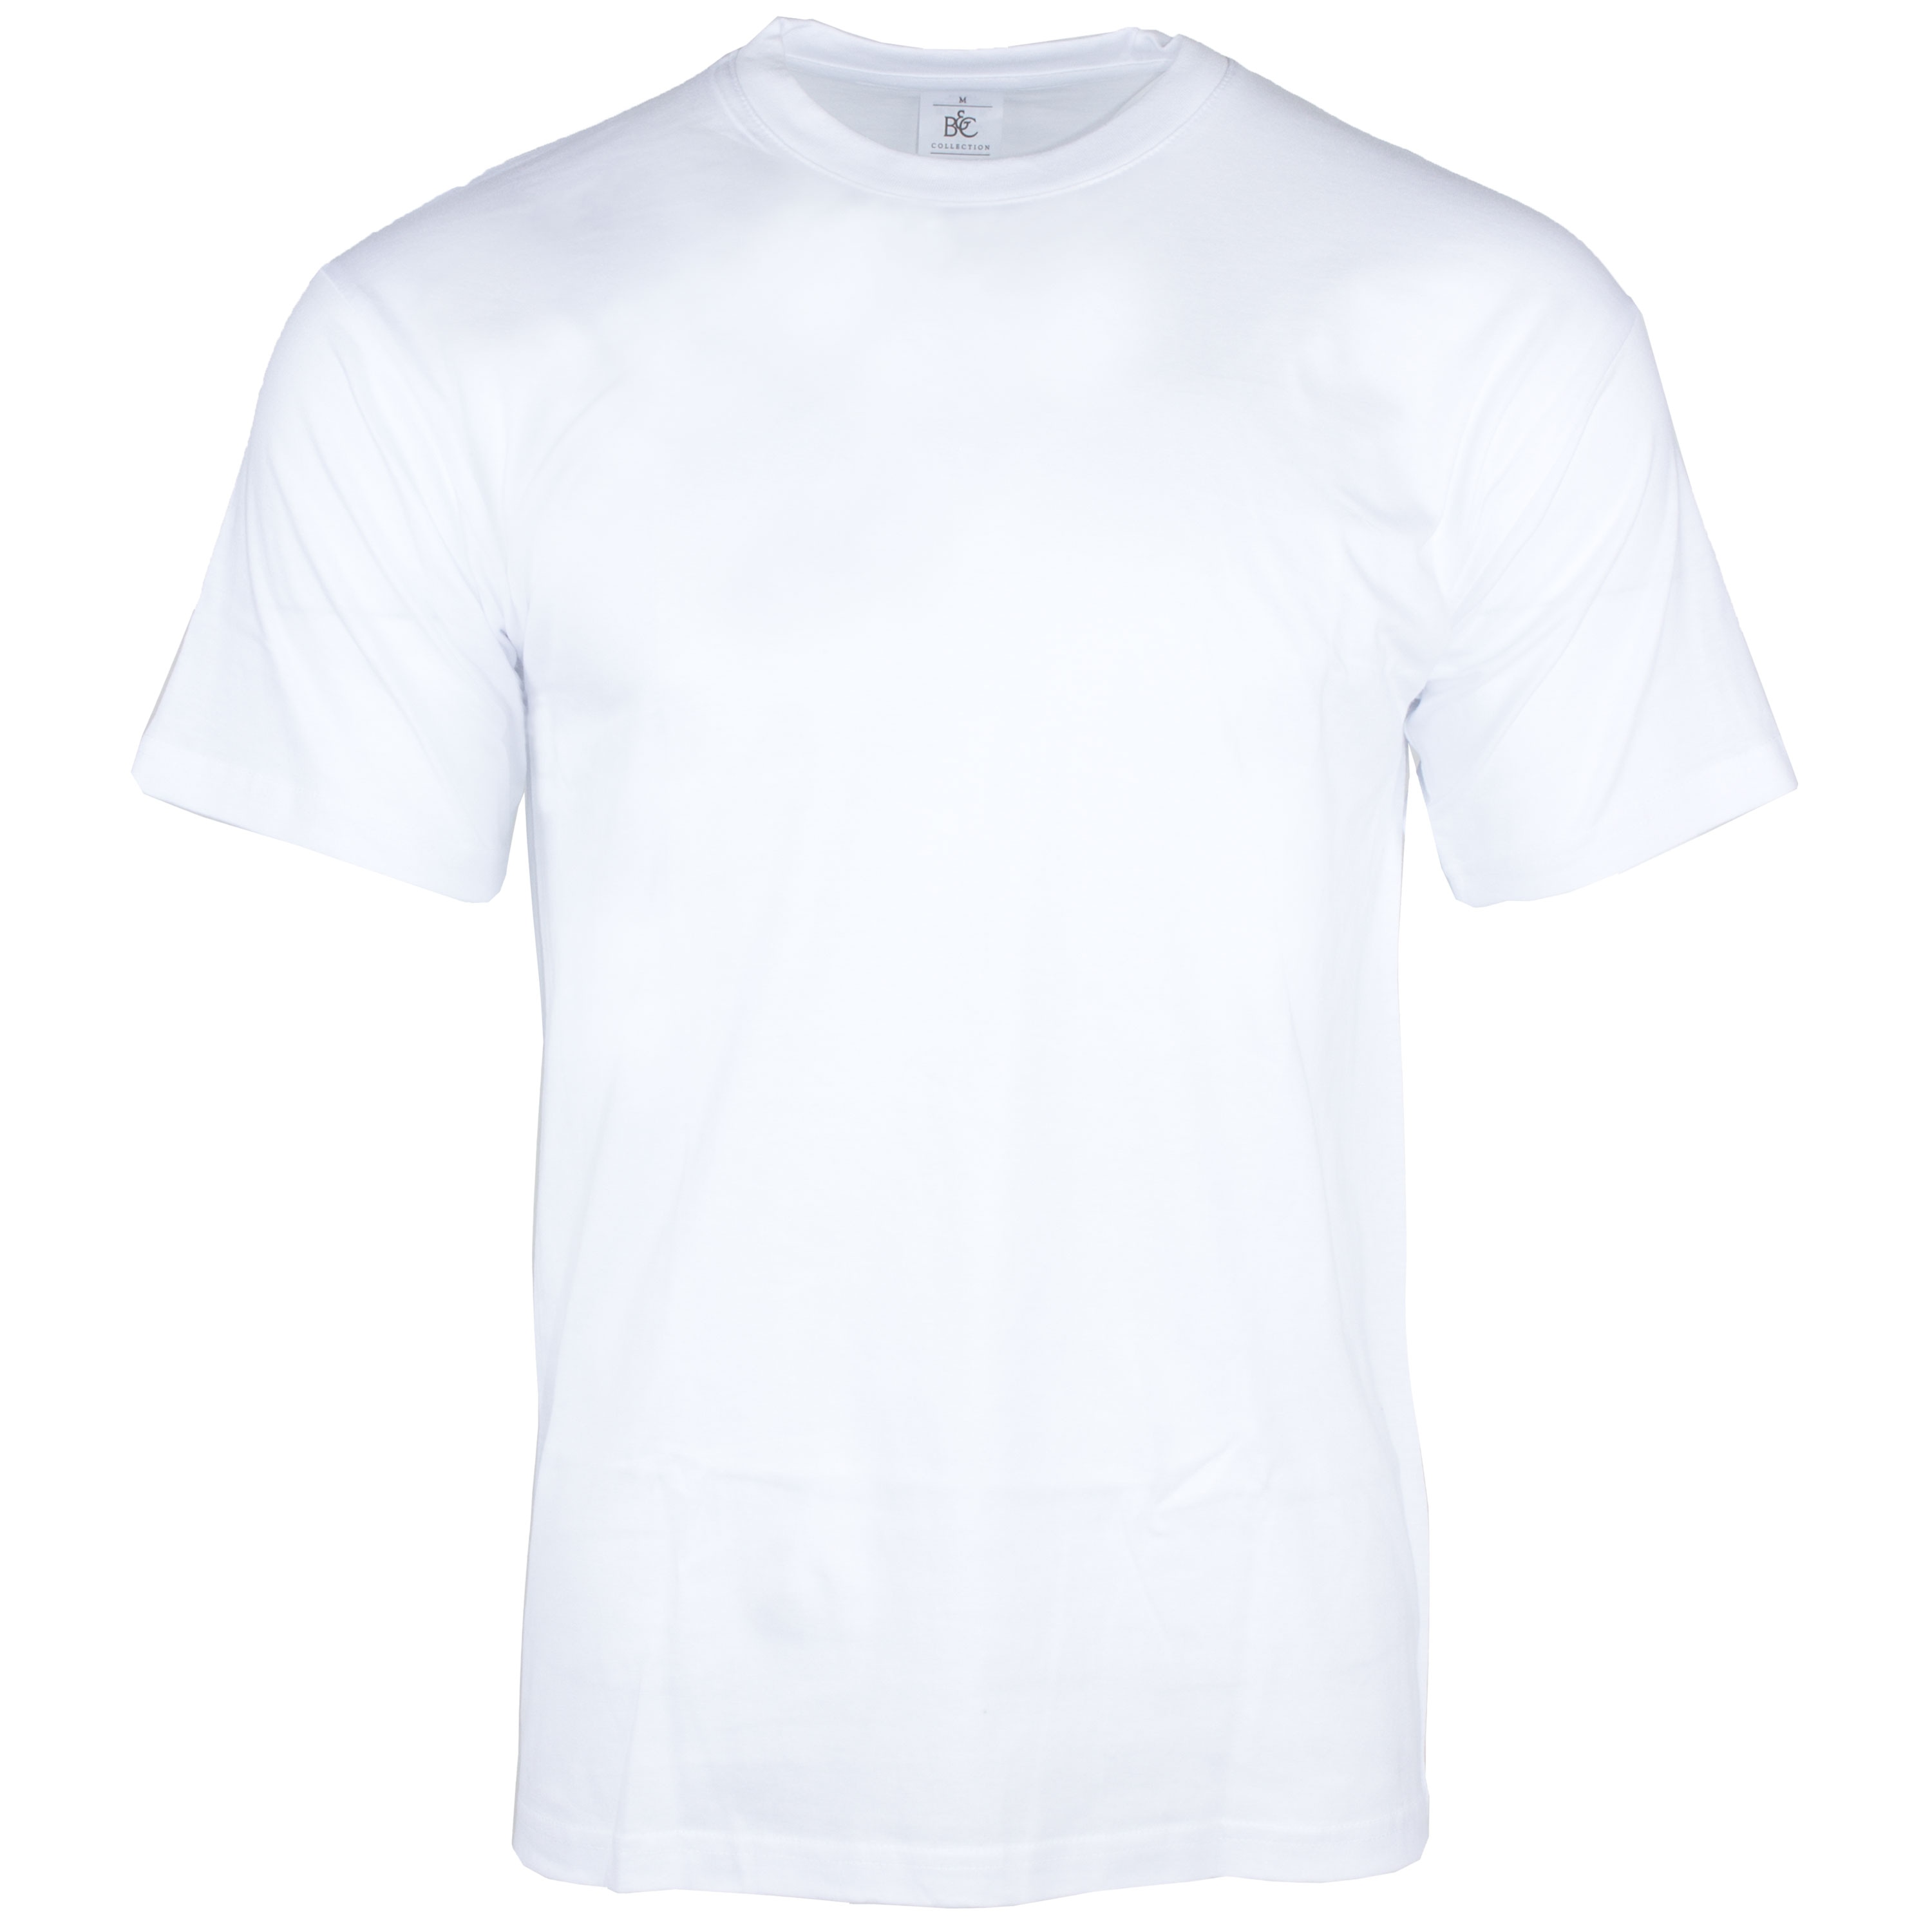 Purchase the T-Shirt white by ASMC